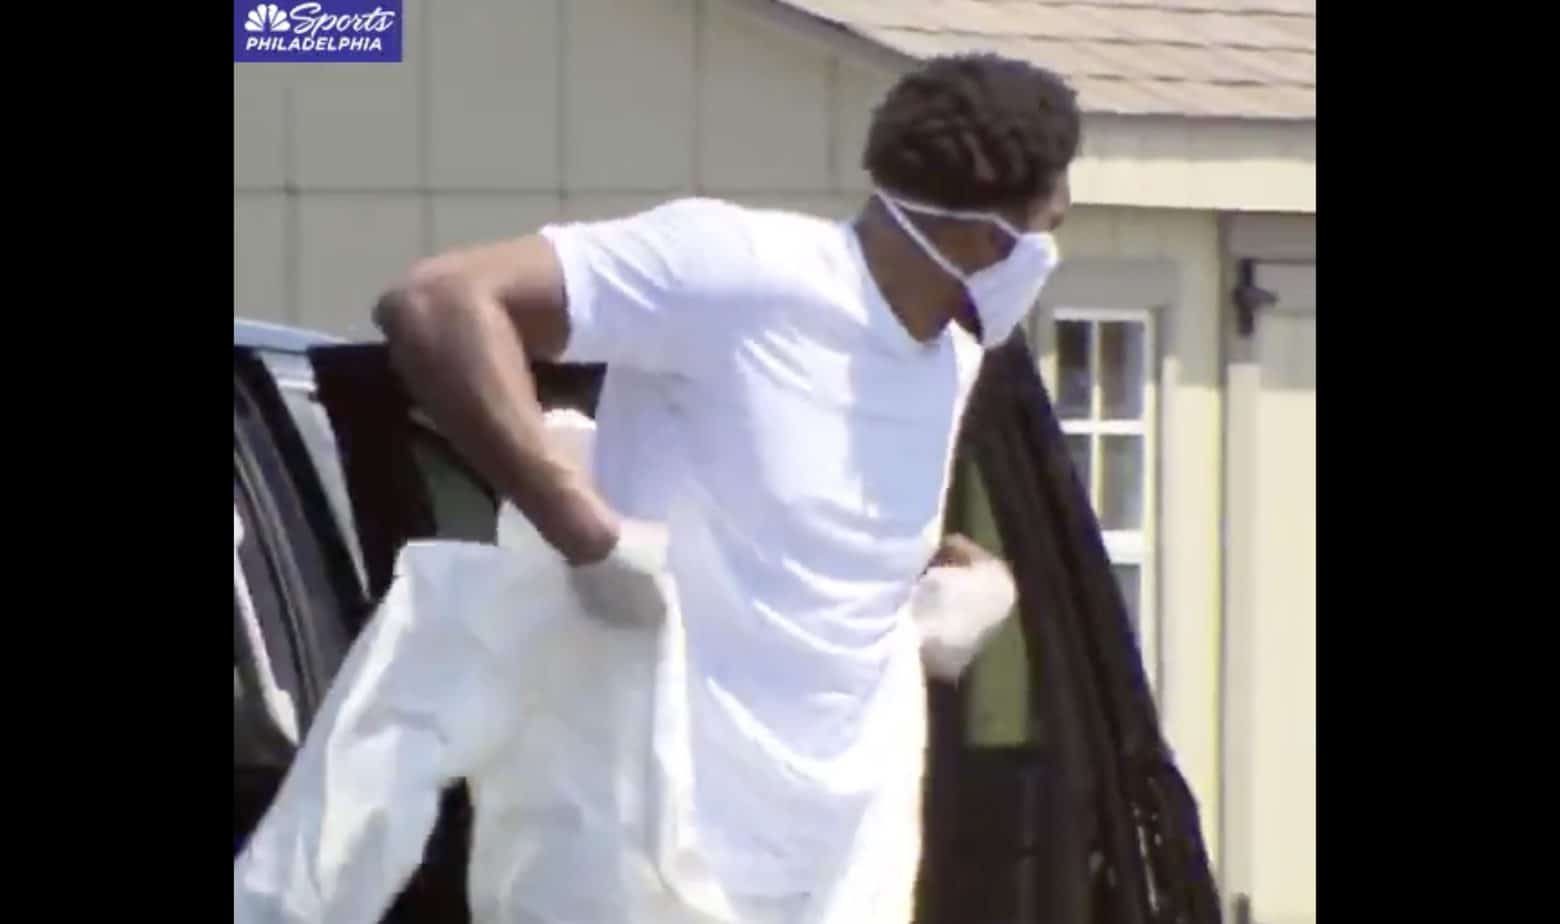 Joel Embiid got to the NBA bubble in Orlando wearing a full hazmat suit, gloves and mask. Looking like he's ready to clean porta potties.